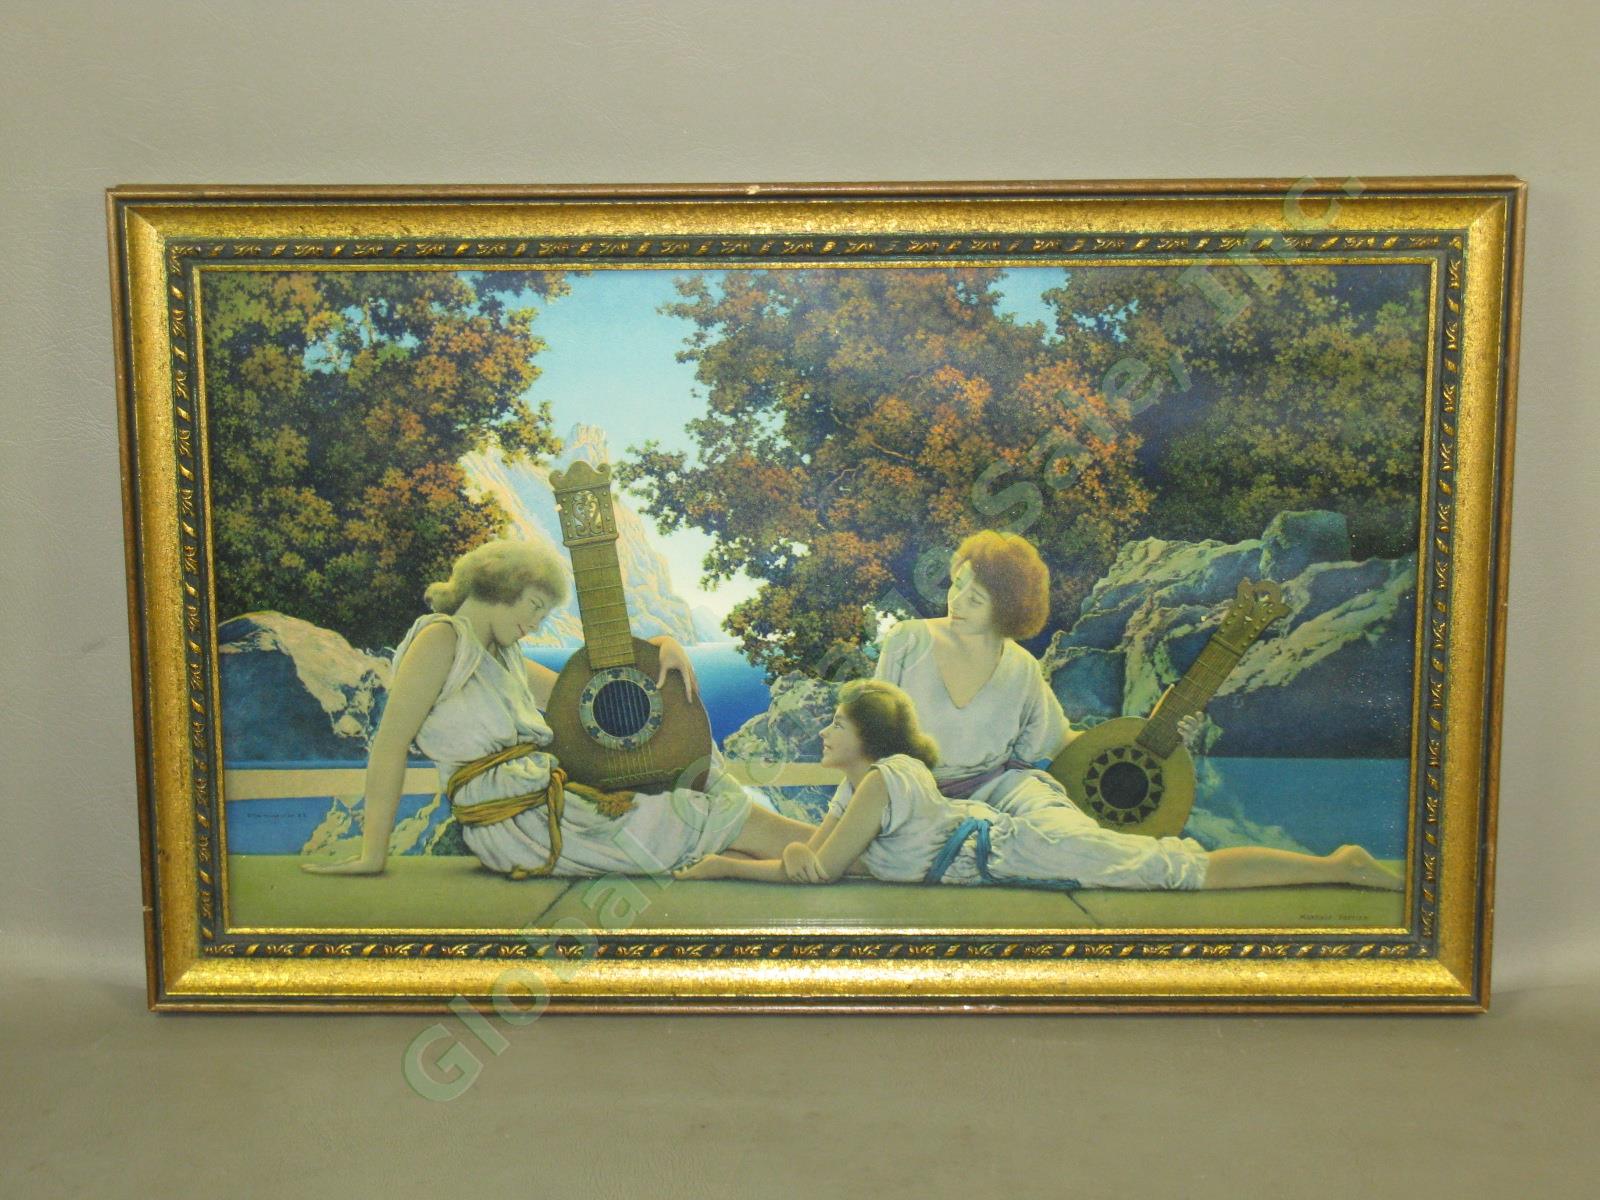 Vtg Framed Maxfield Parrish Lute Players Lithograph Print The House Of Art 20x12